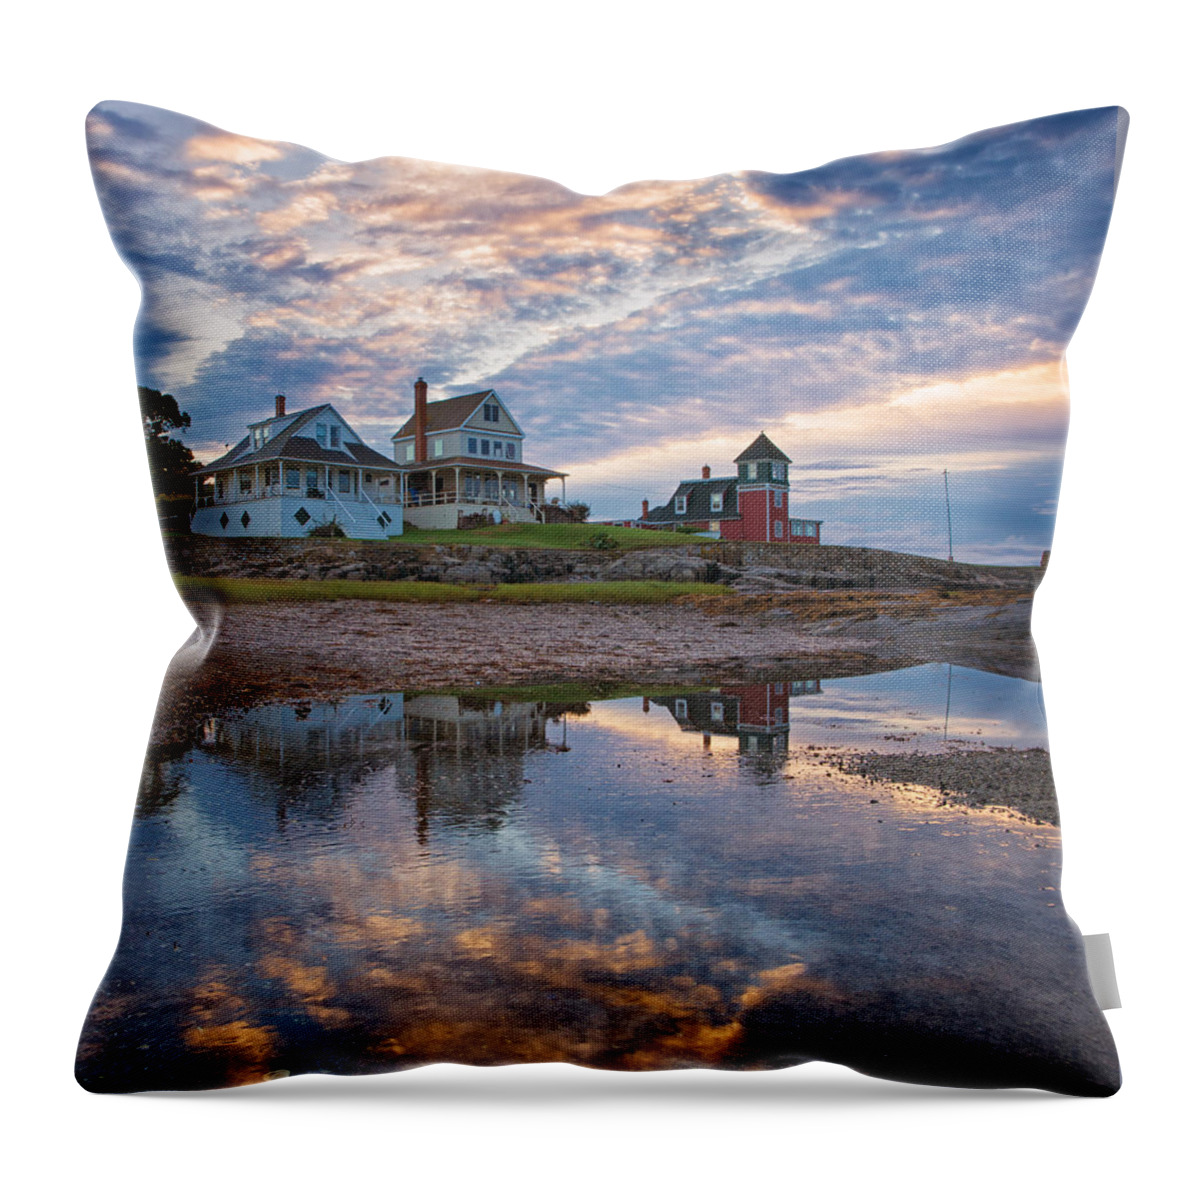 #boats Throw Pillow featuring the photograph Houses by the Cribstone by Darylann Leonard Photography